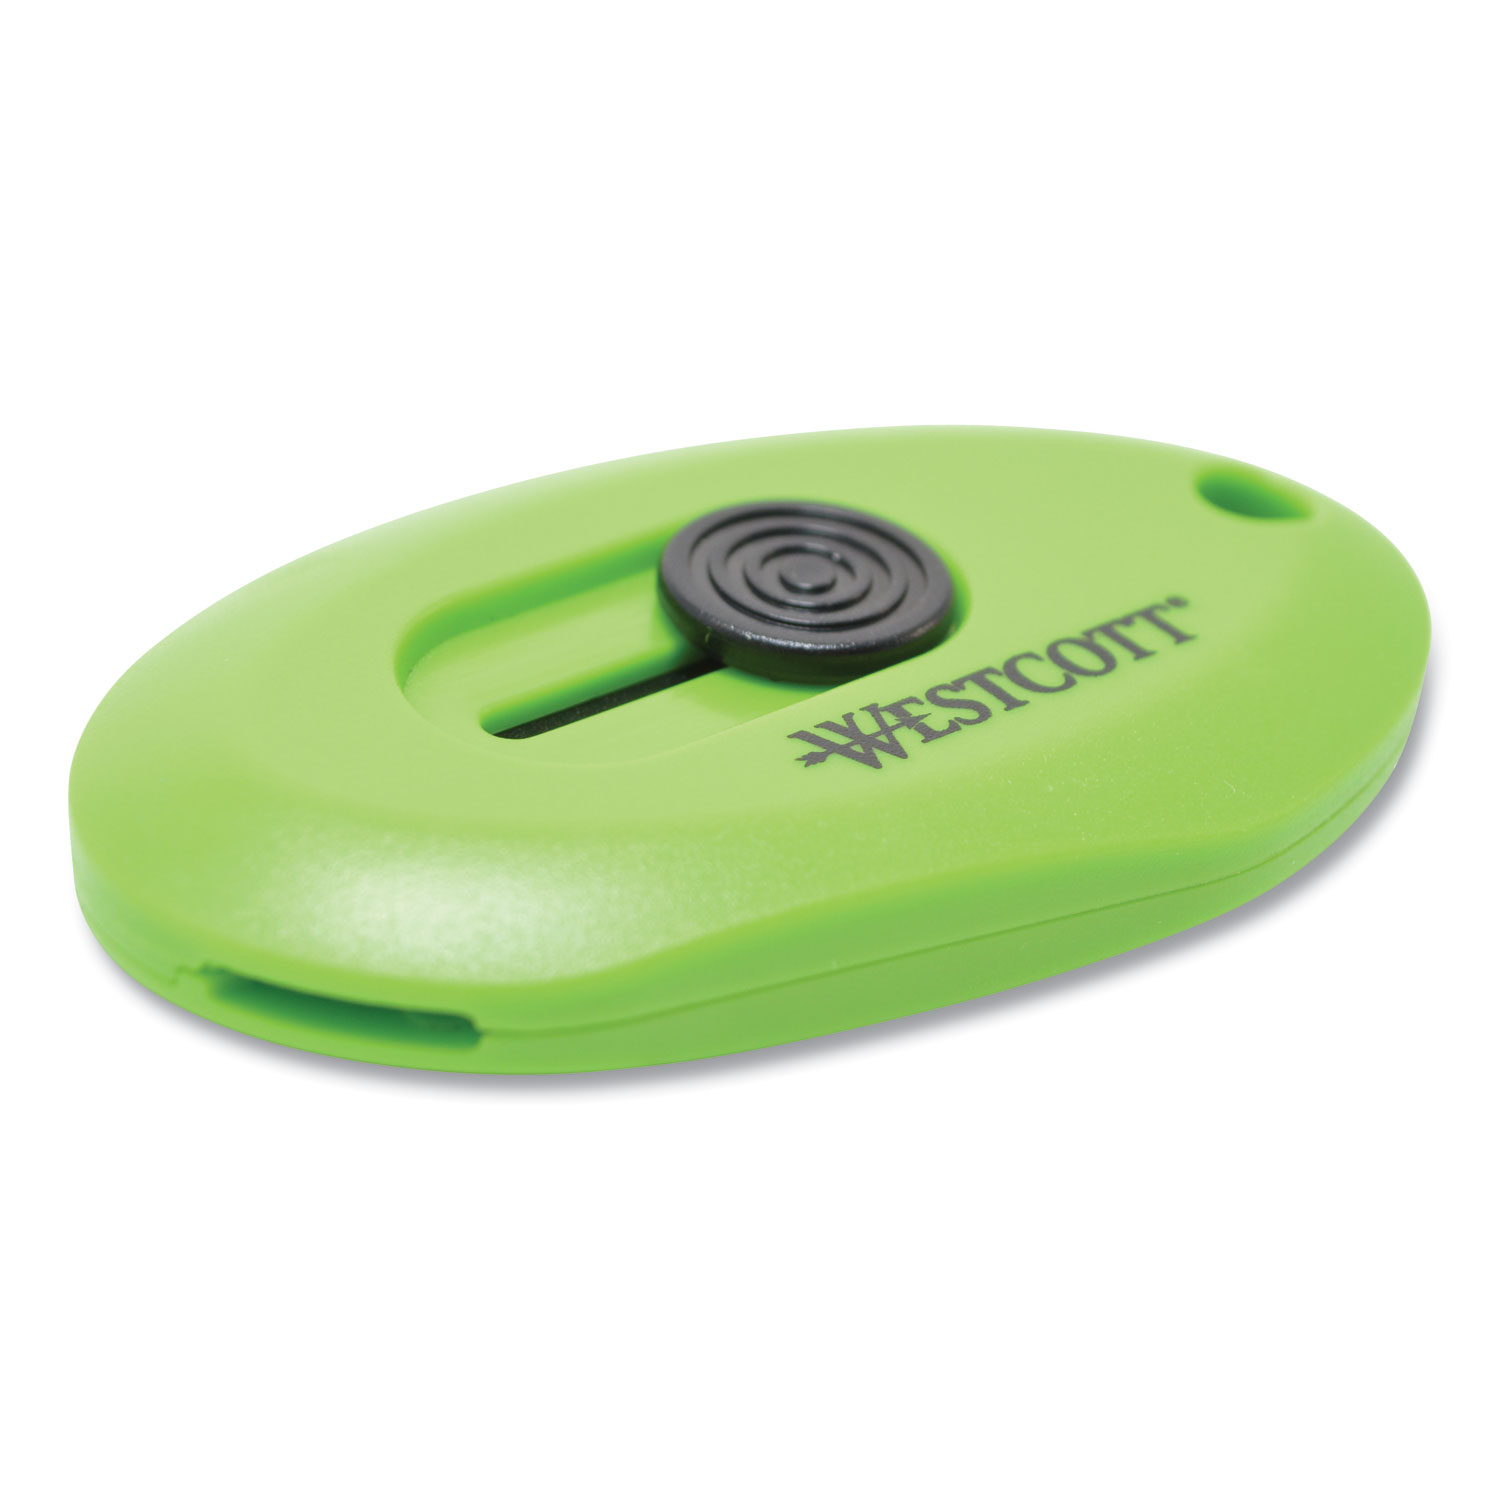 Westcott Compact Safety Ceramic Blade Box Cutter, 2.25, Fixed Blade, Green